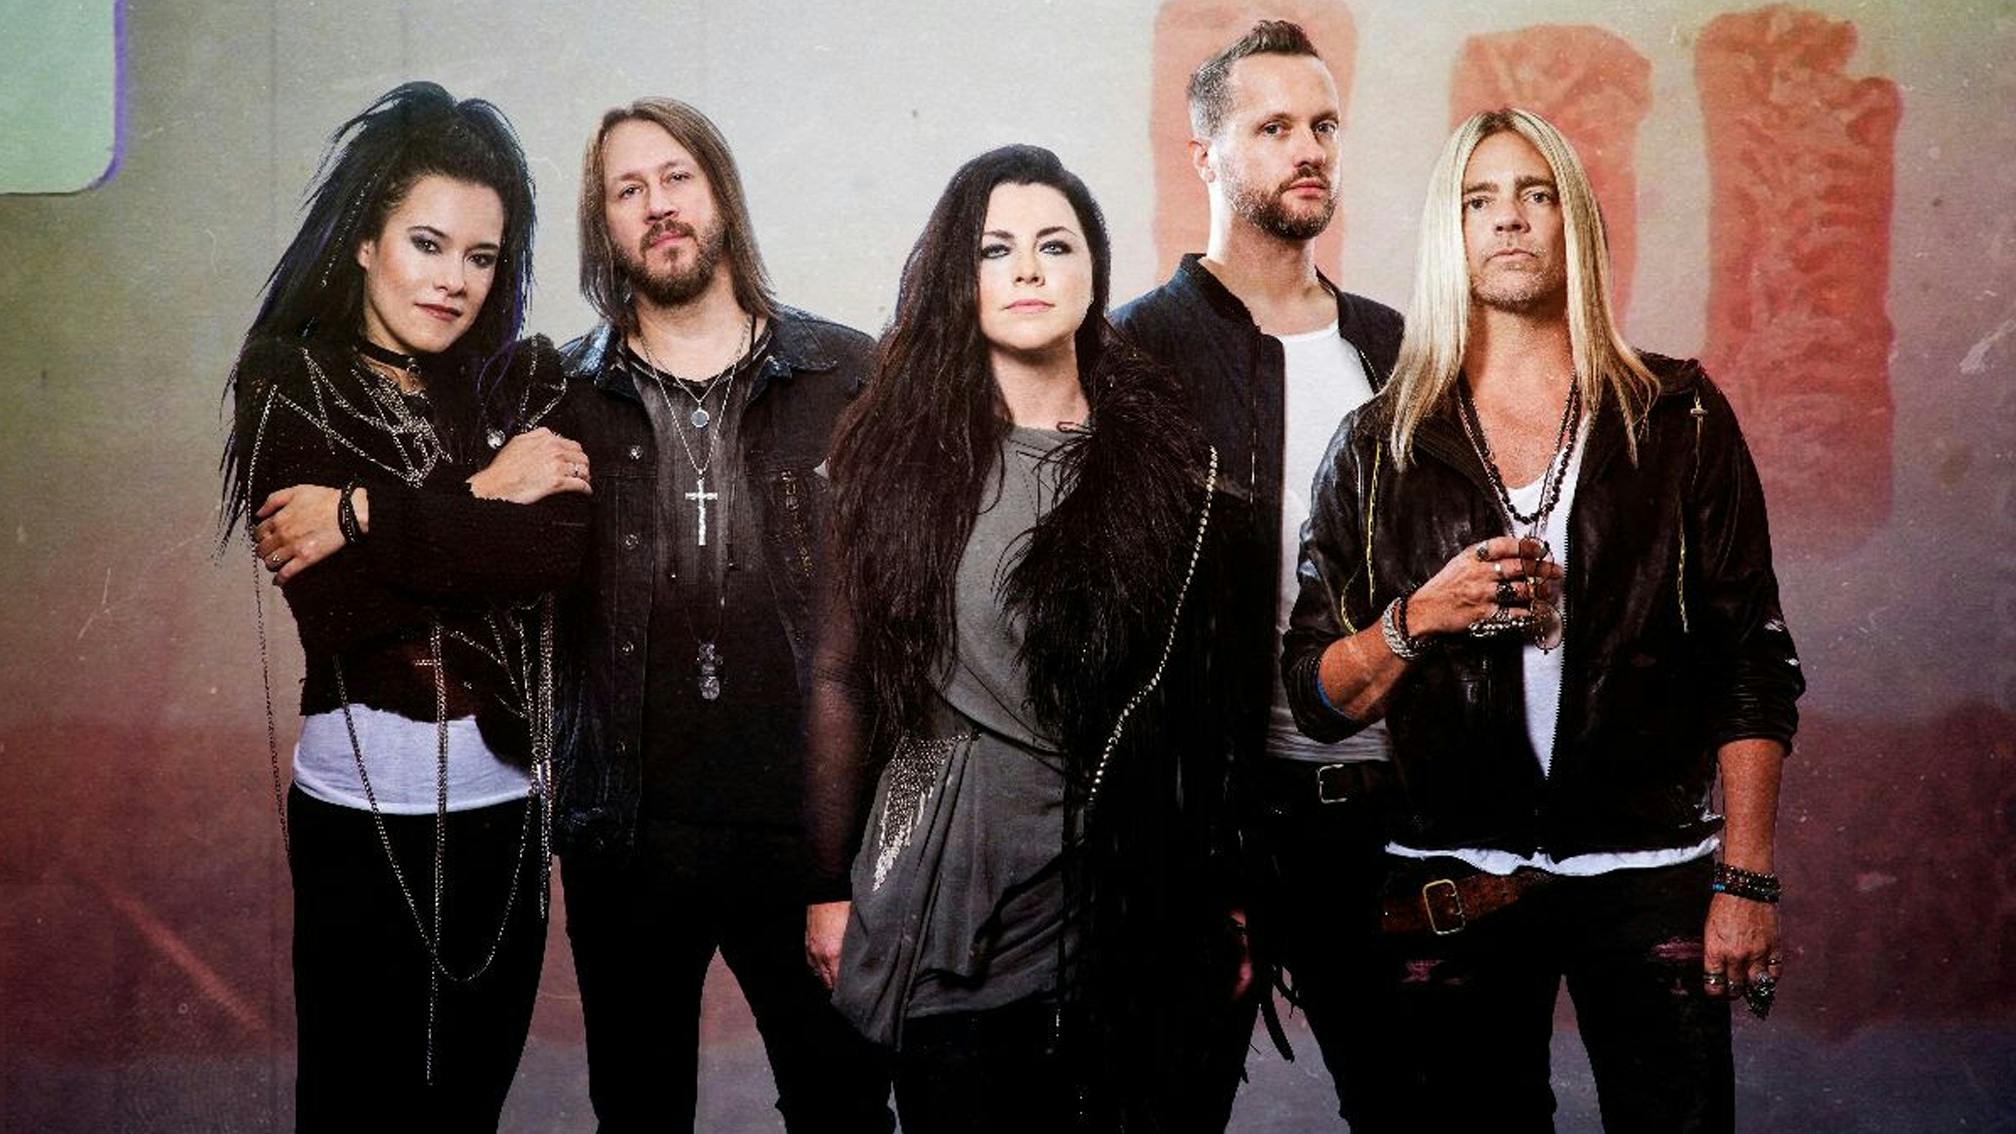 Evanescence have parted ways with guitarist Jen Majura